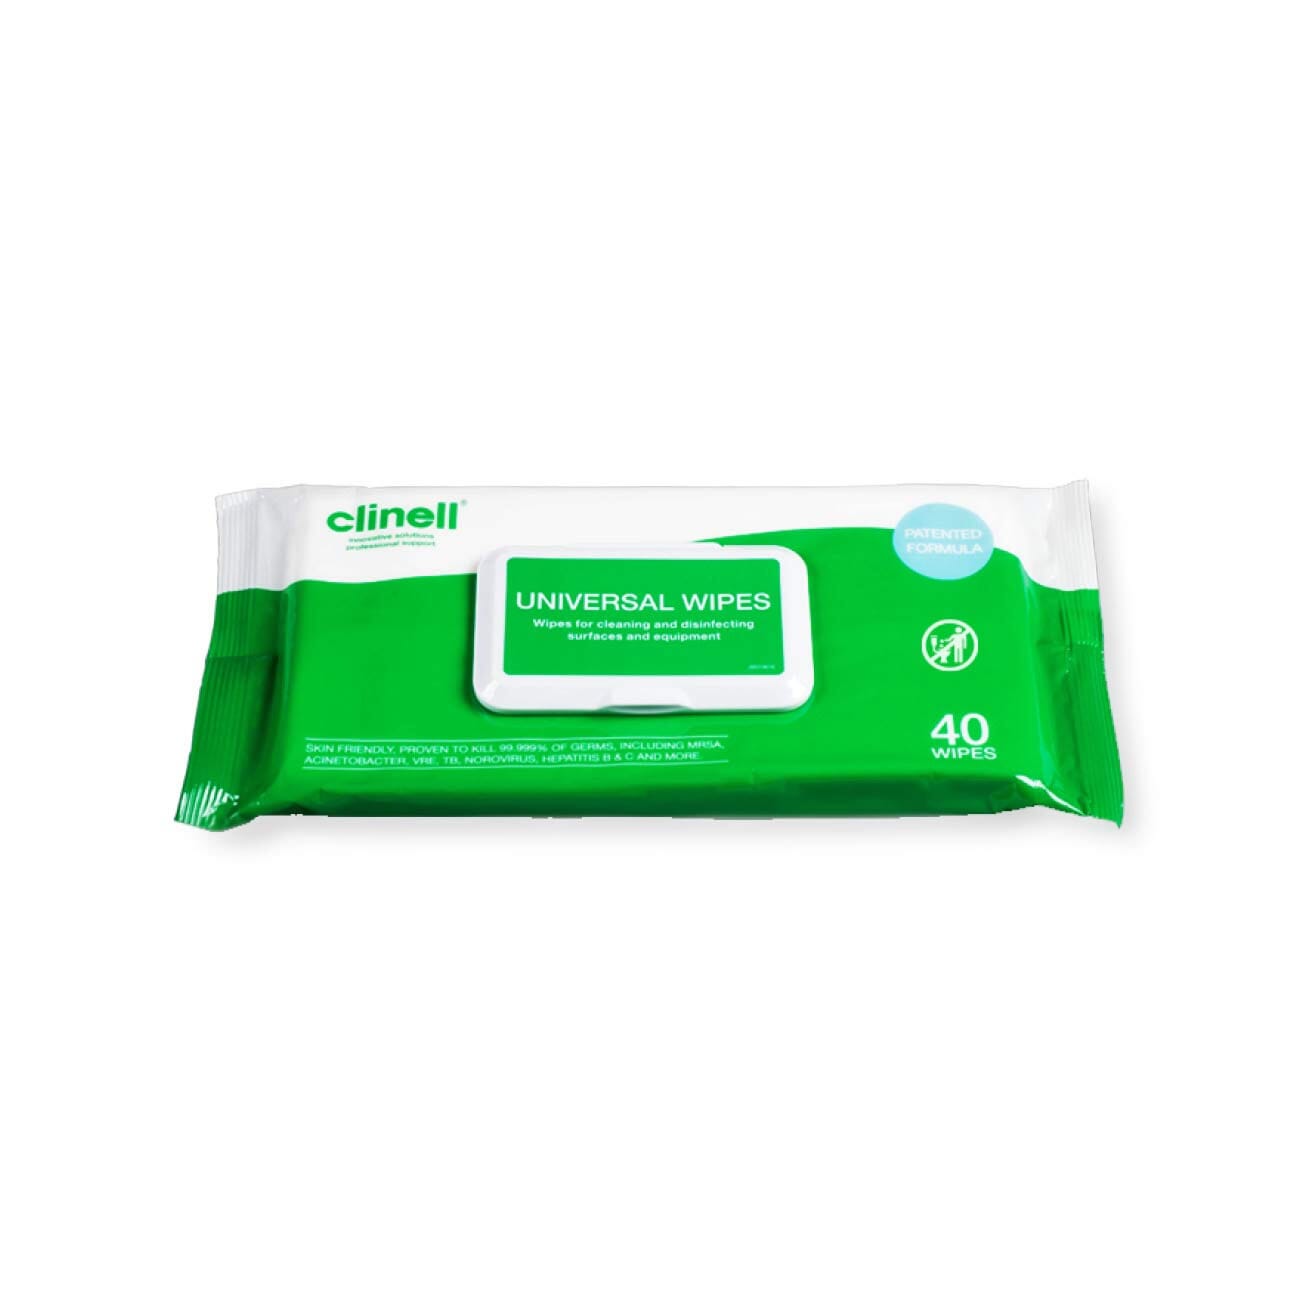 View Clinell Universal Sanitising Wipes Pack of 40 Wipes information